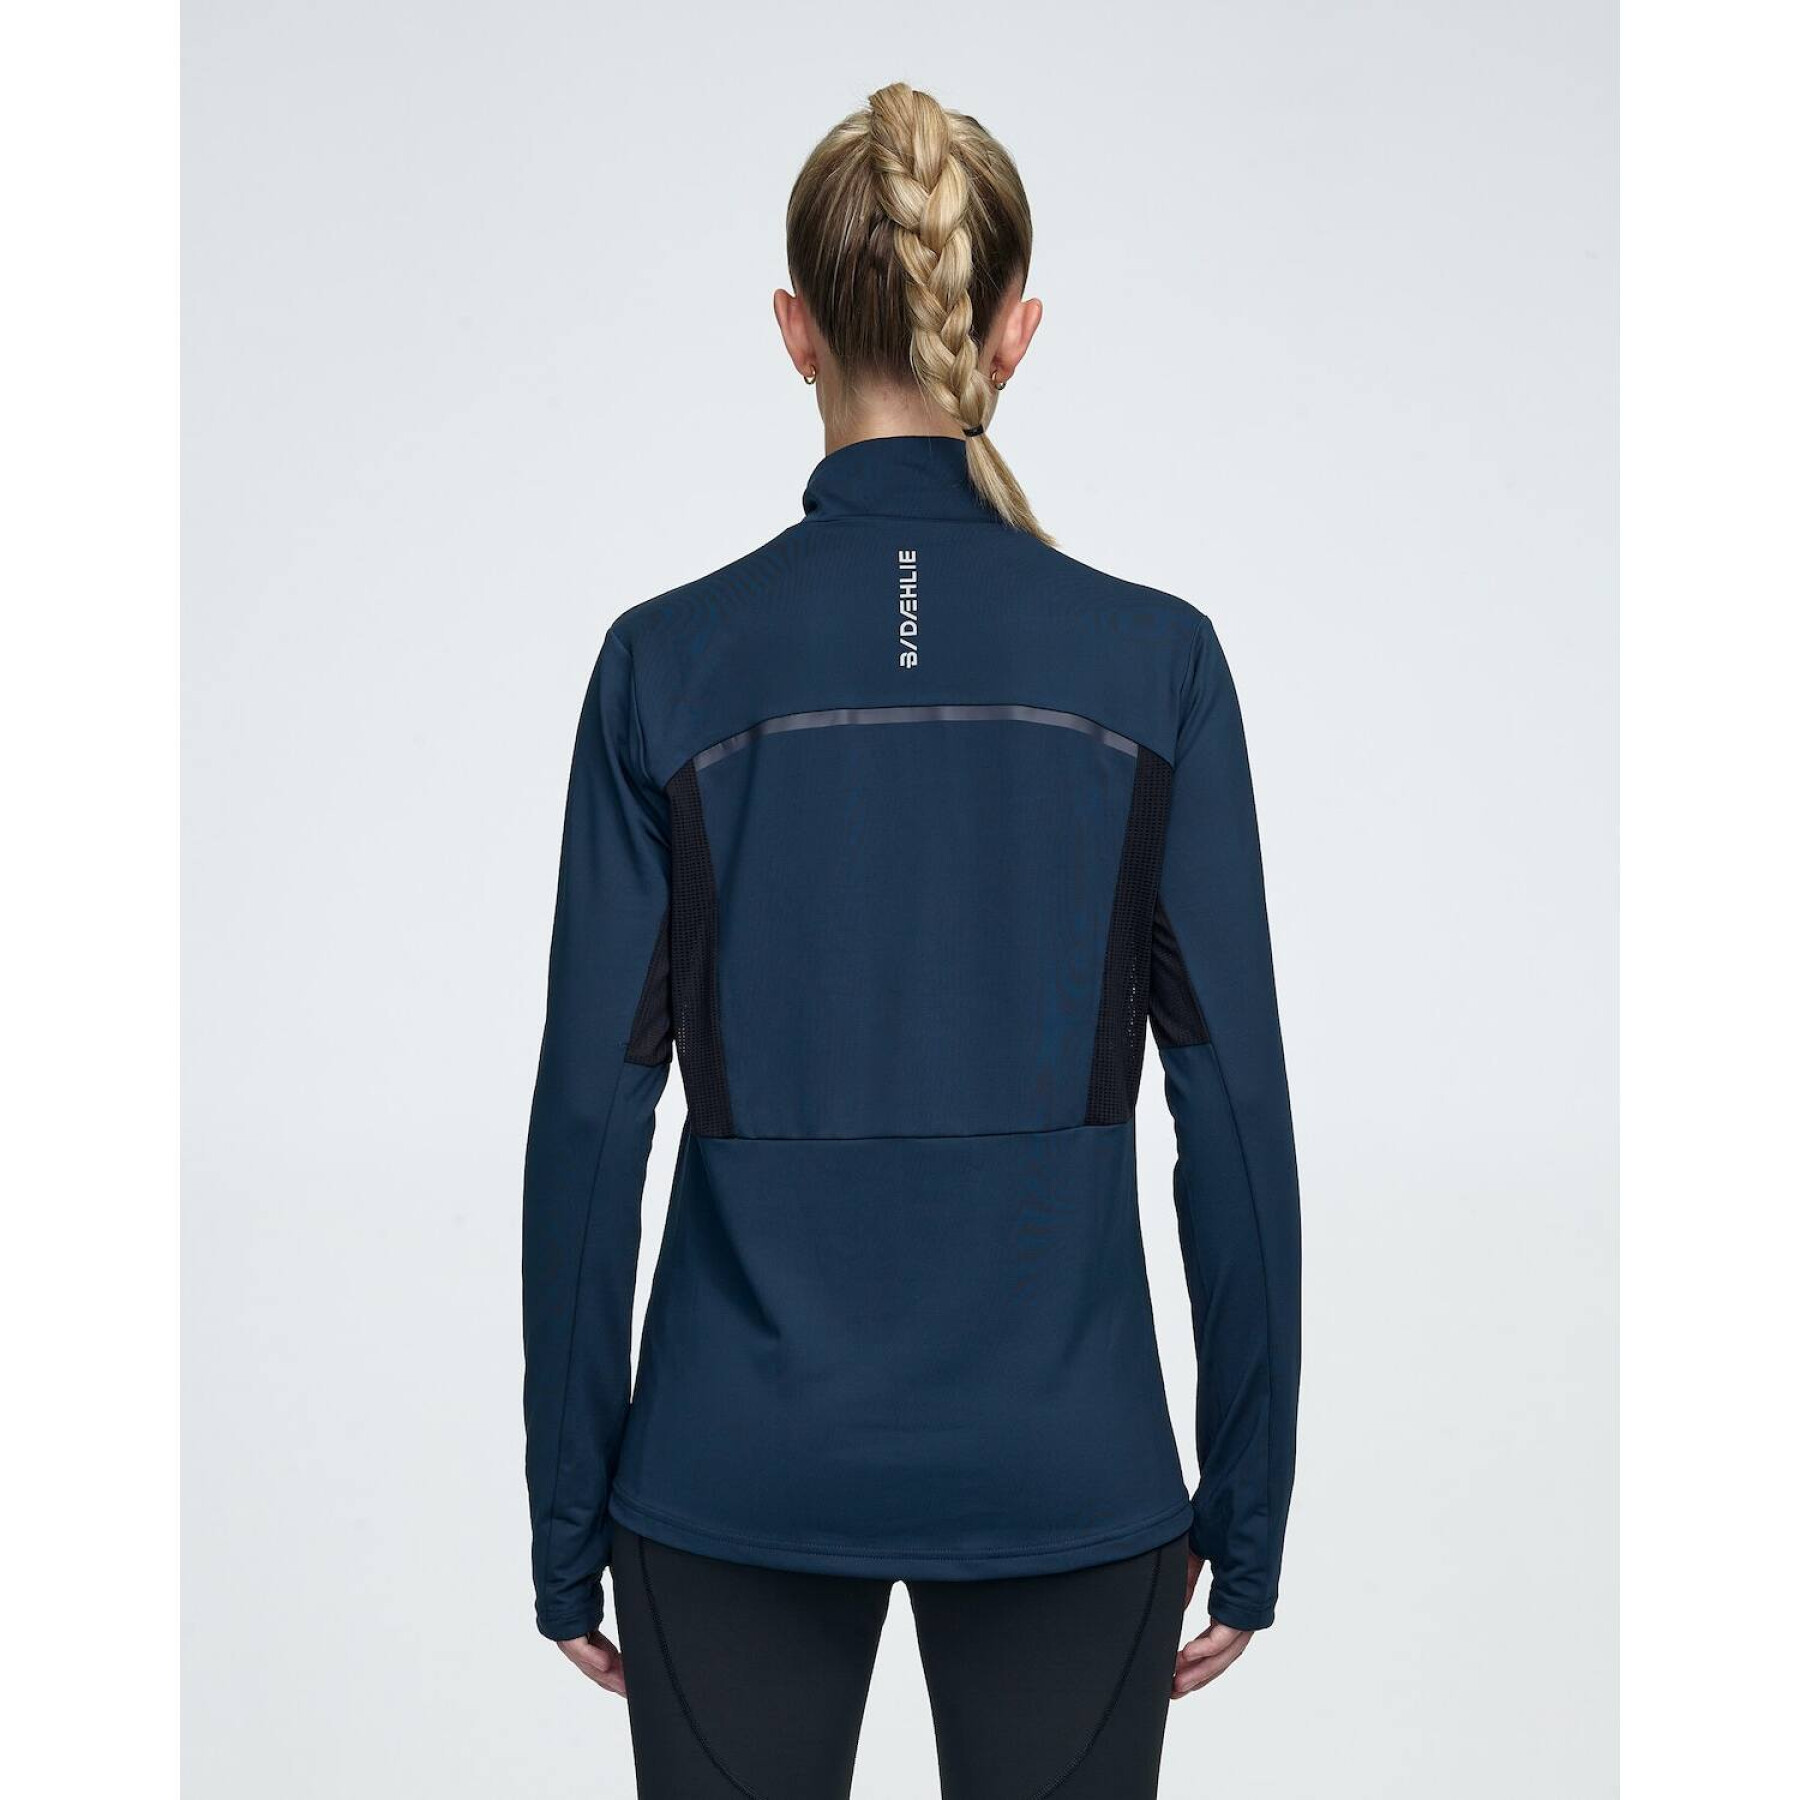 Maillot manches longues femme Daehlie Sportswear